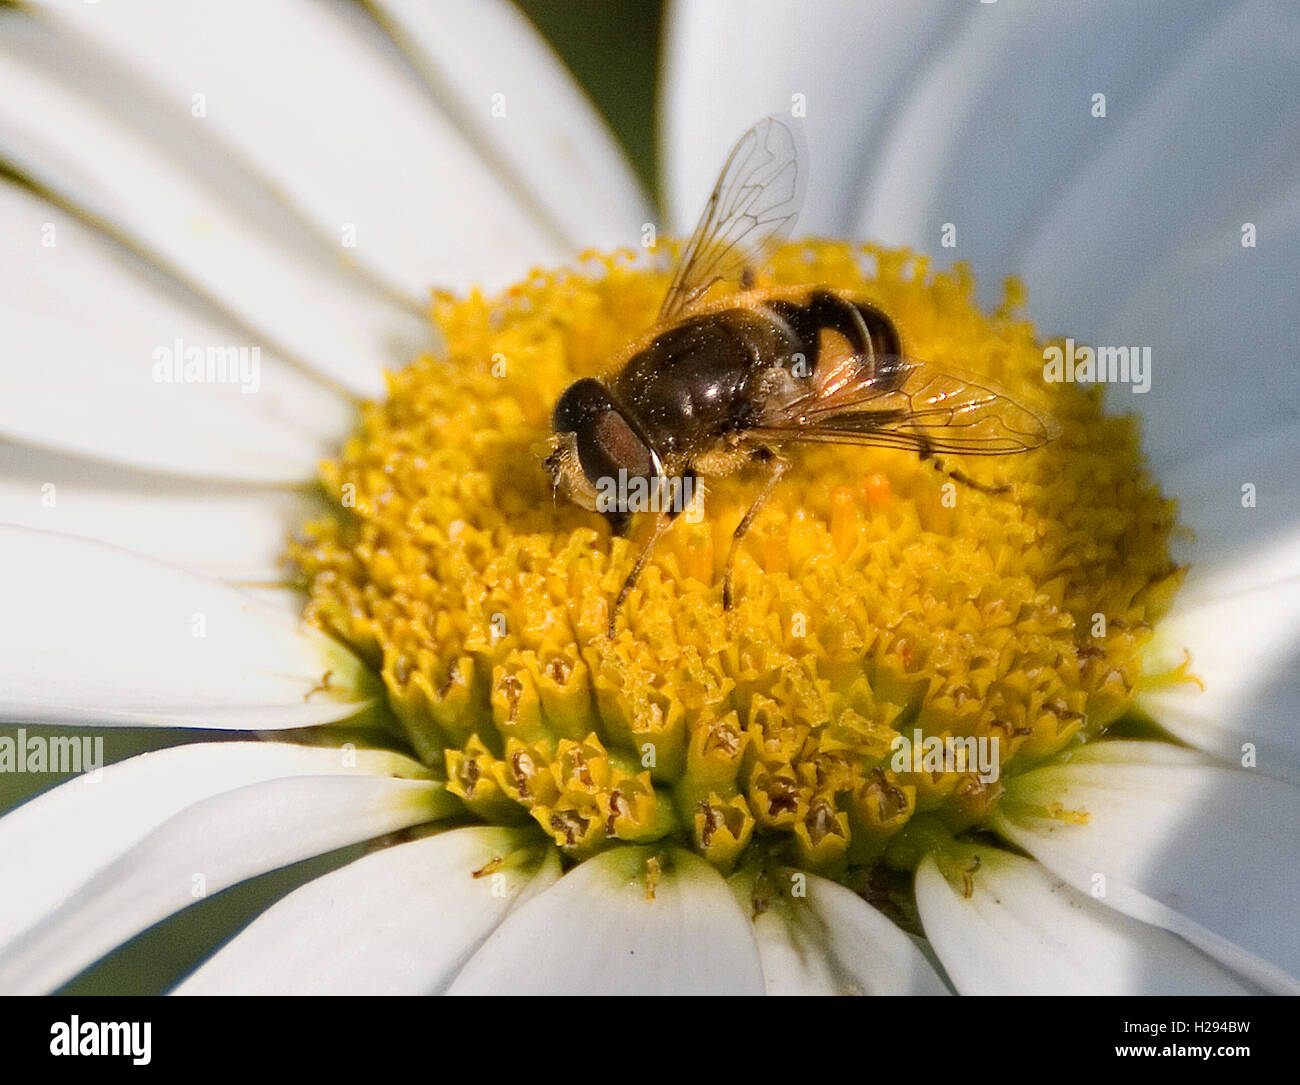 Bee collecting pollen from a cultivated garden daisy Stock Photo